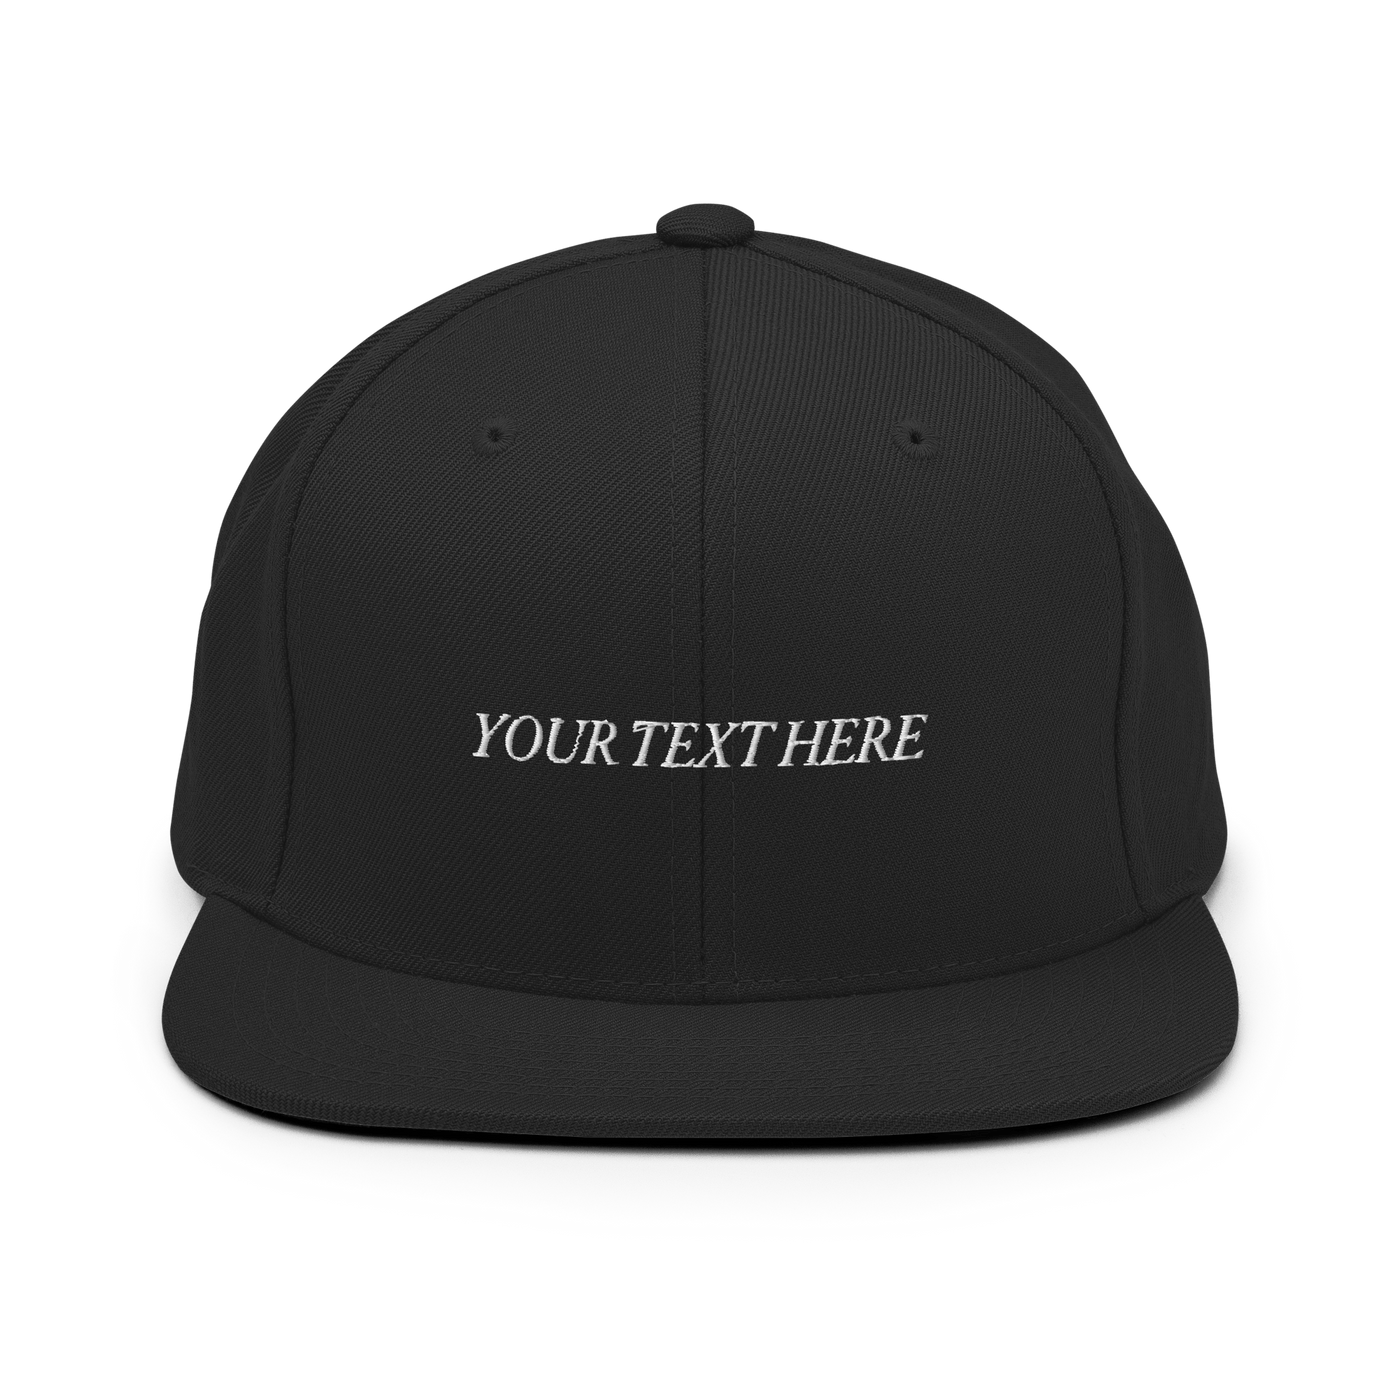 Customize Your Own Snapback Hat - Italic Font - Black - - Just Another Cap Store